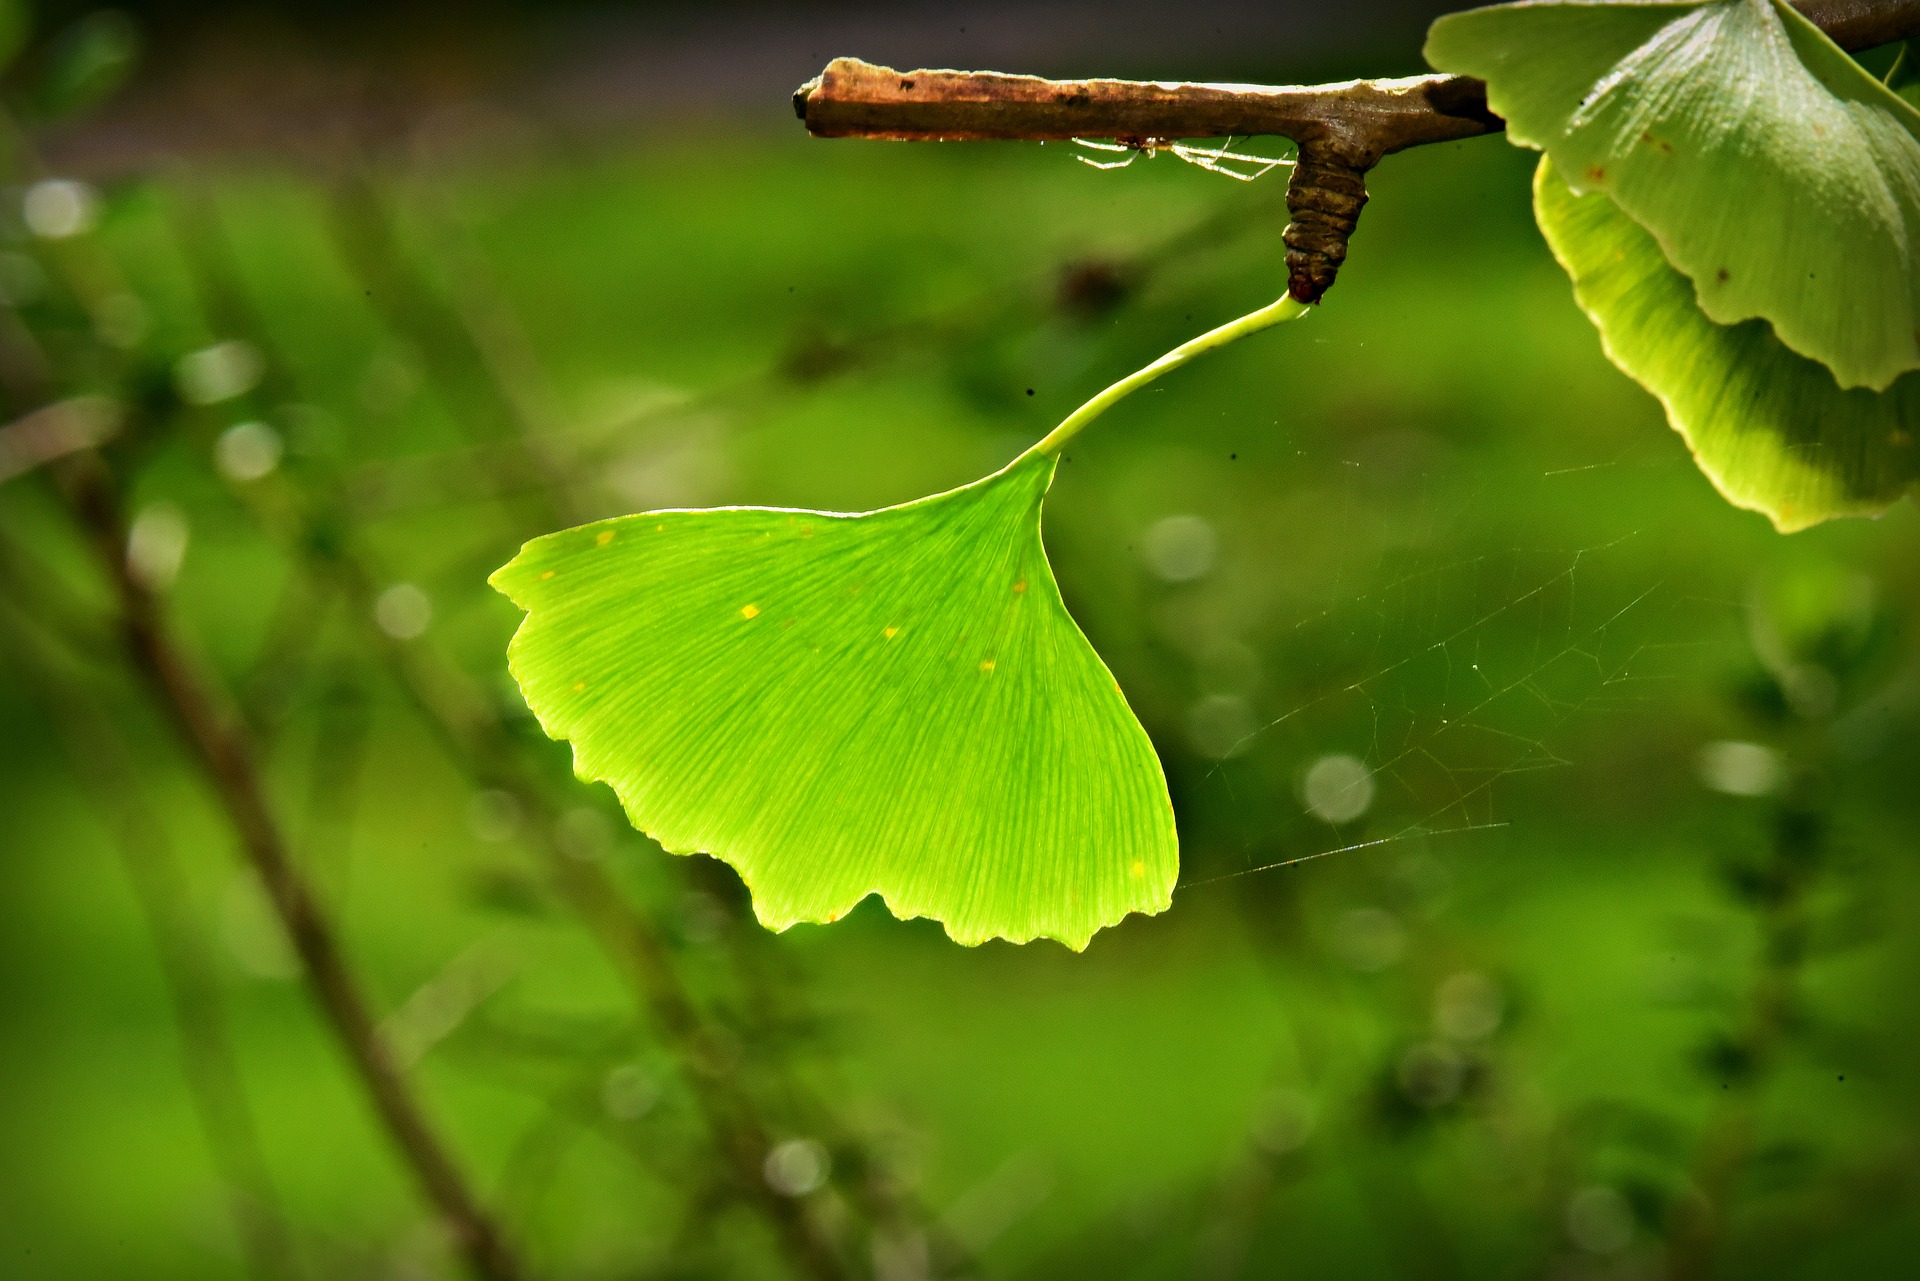 ginkgo tree with leaf on branch